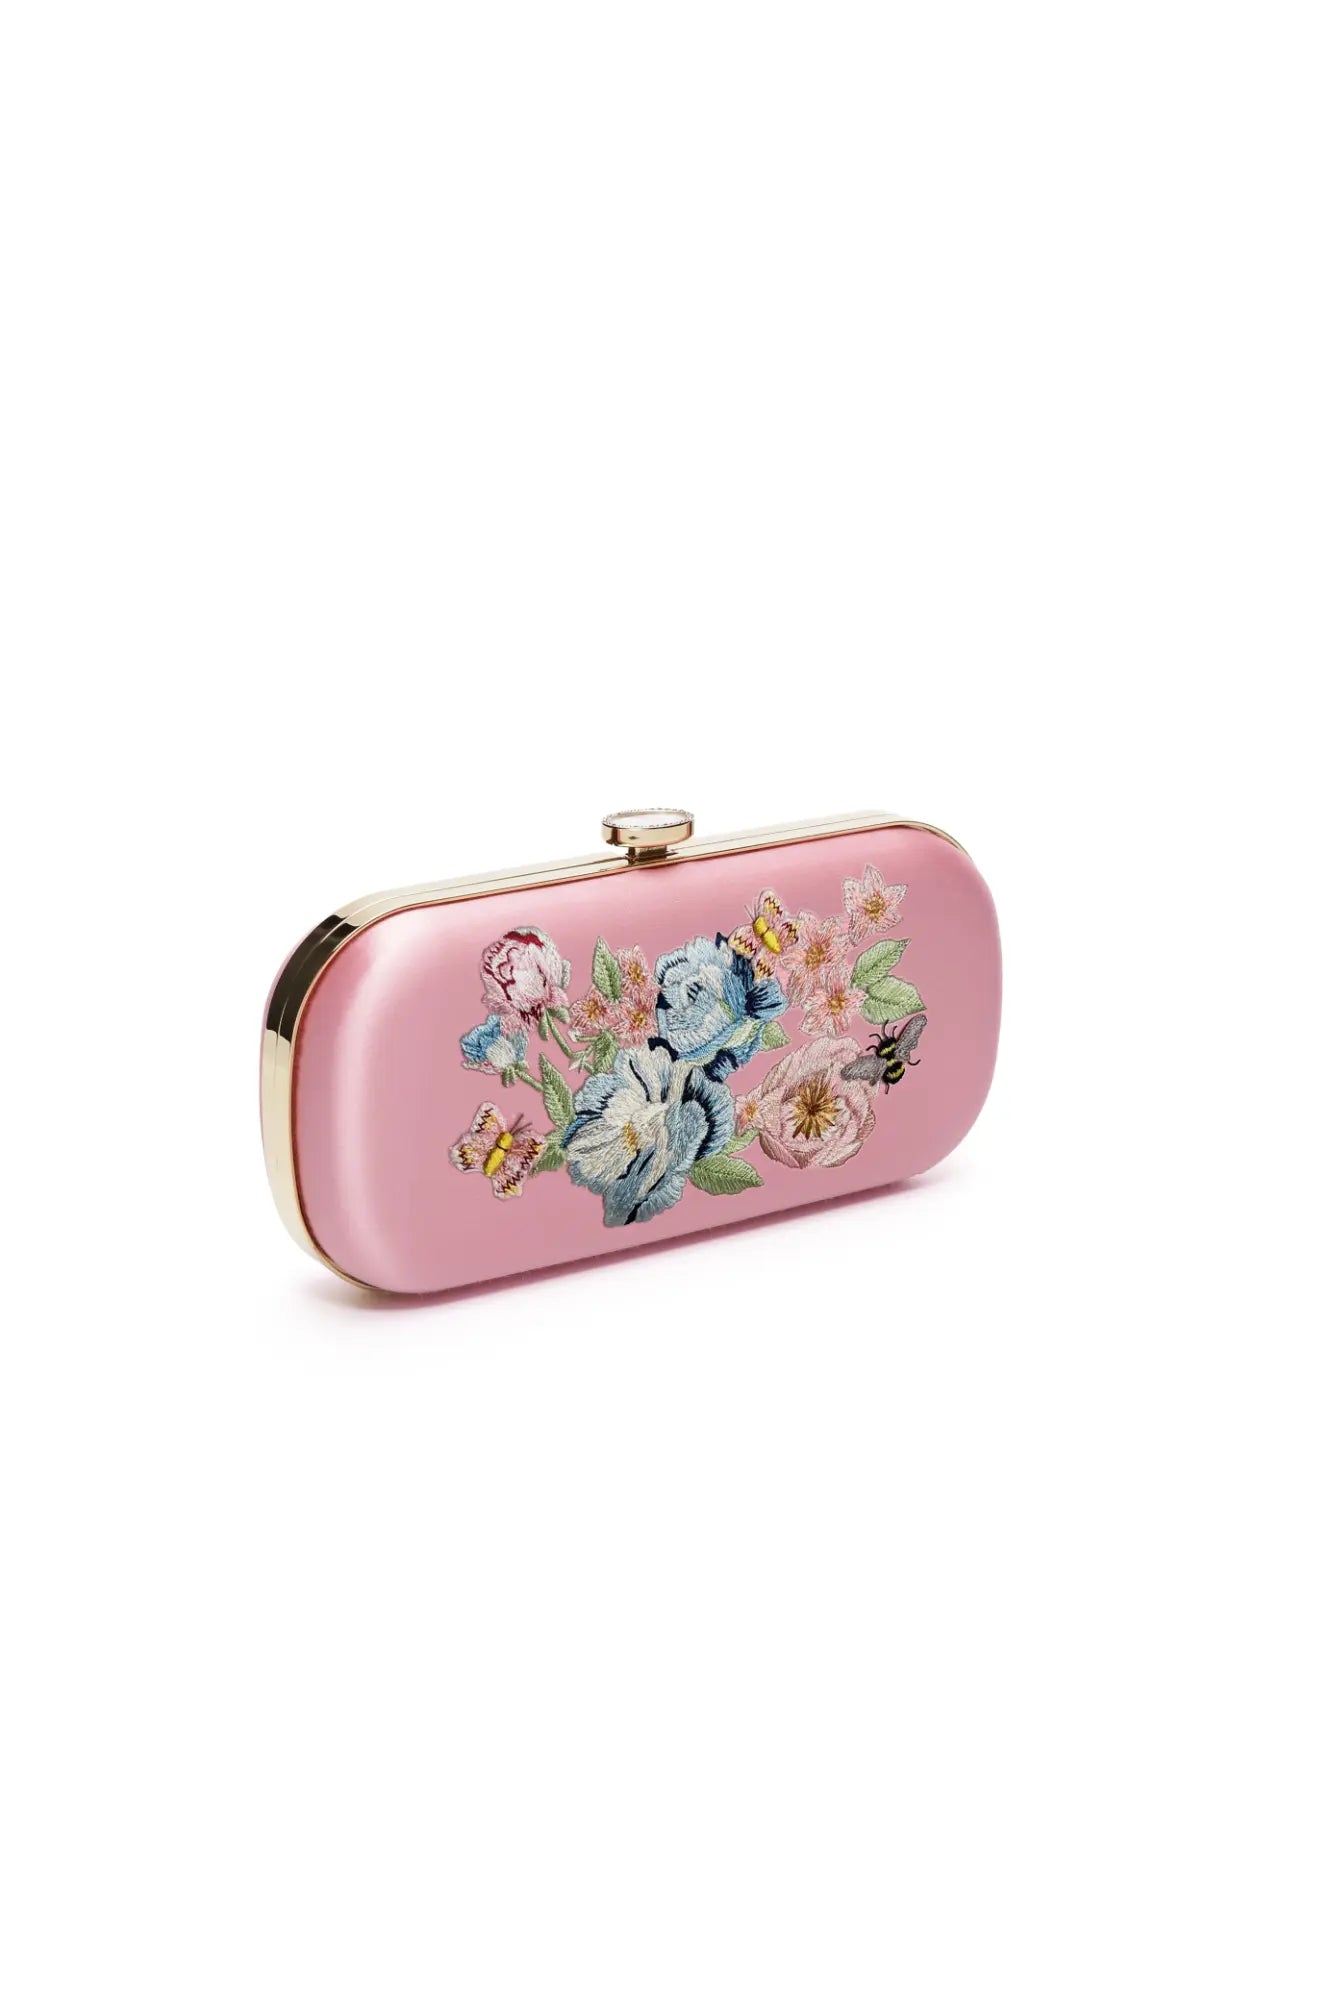 Personalized keepsake Bella Clutch Pink Floral Embroidery Petite from The Bella Rosa Collection, made from Italian Duchess Satin.